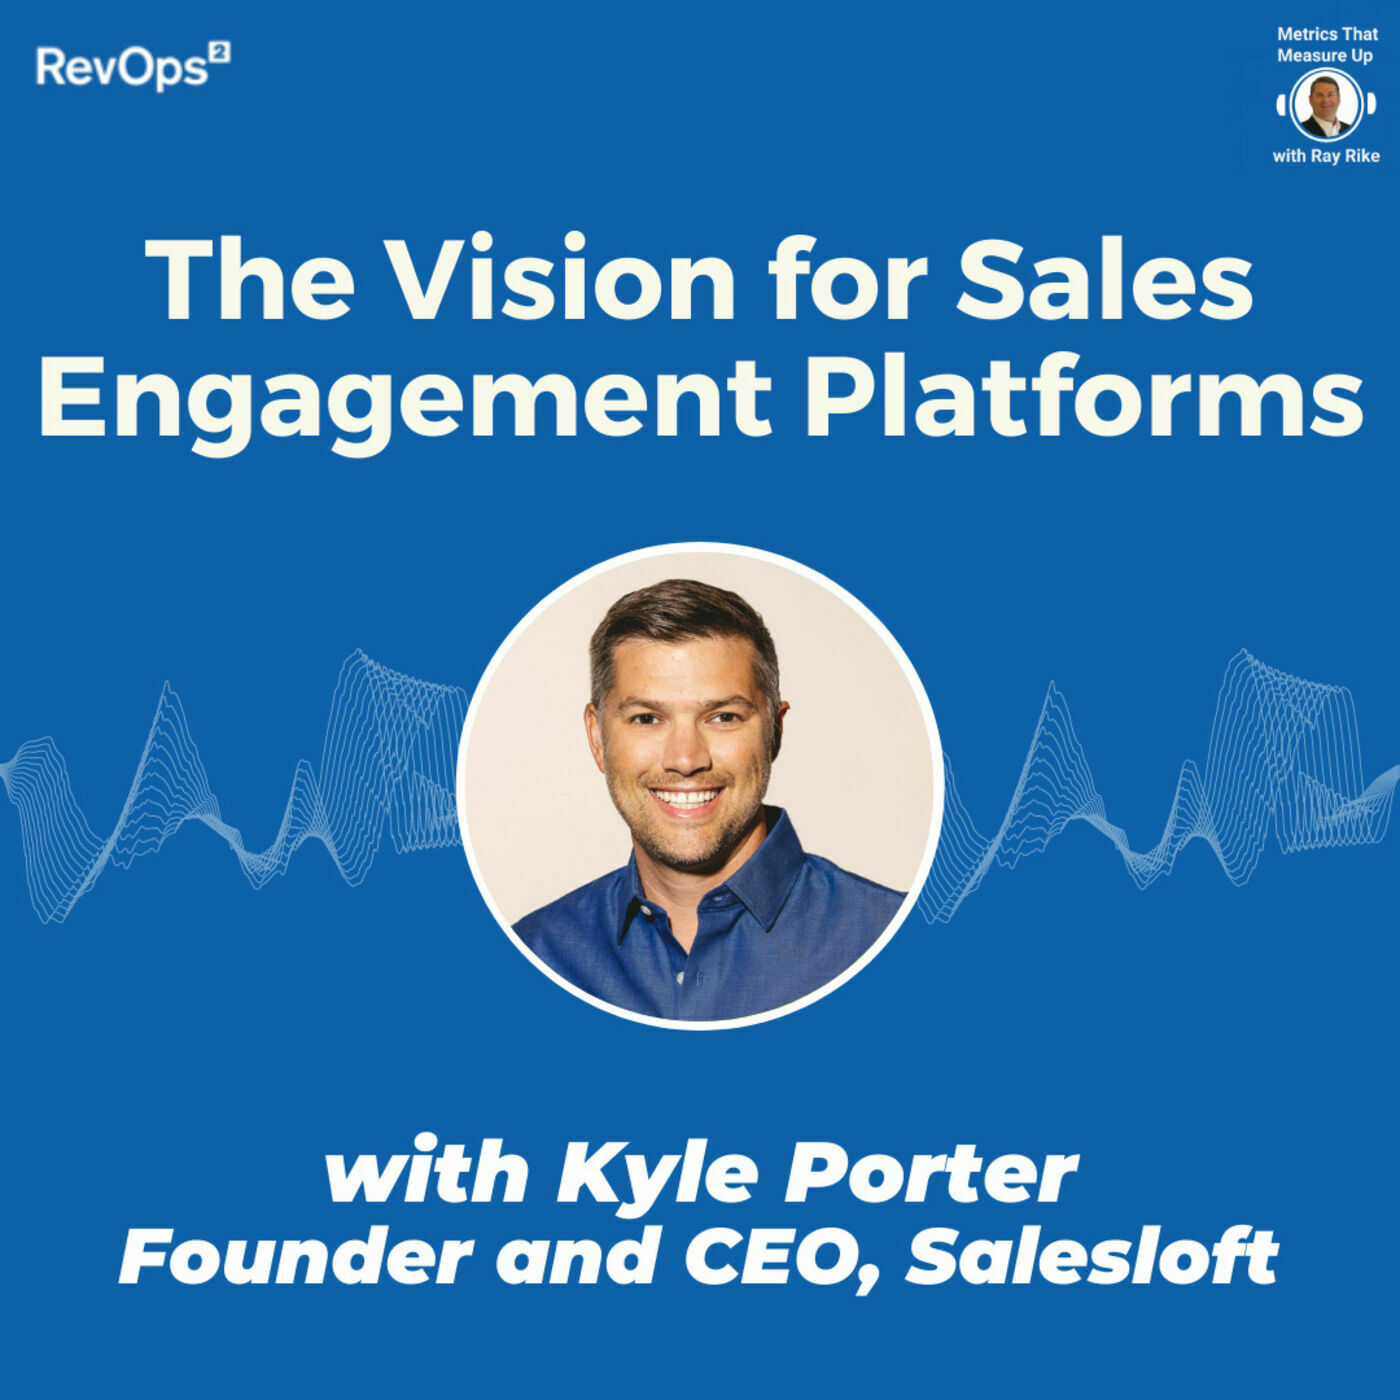 Expanding the Sales Engagement Platform Vision - with Kyle Porter, Founder and CEO Salesloft